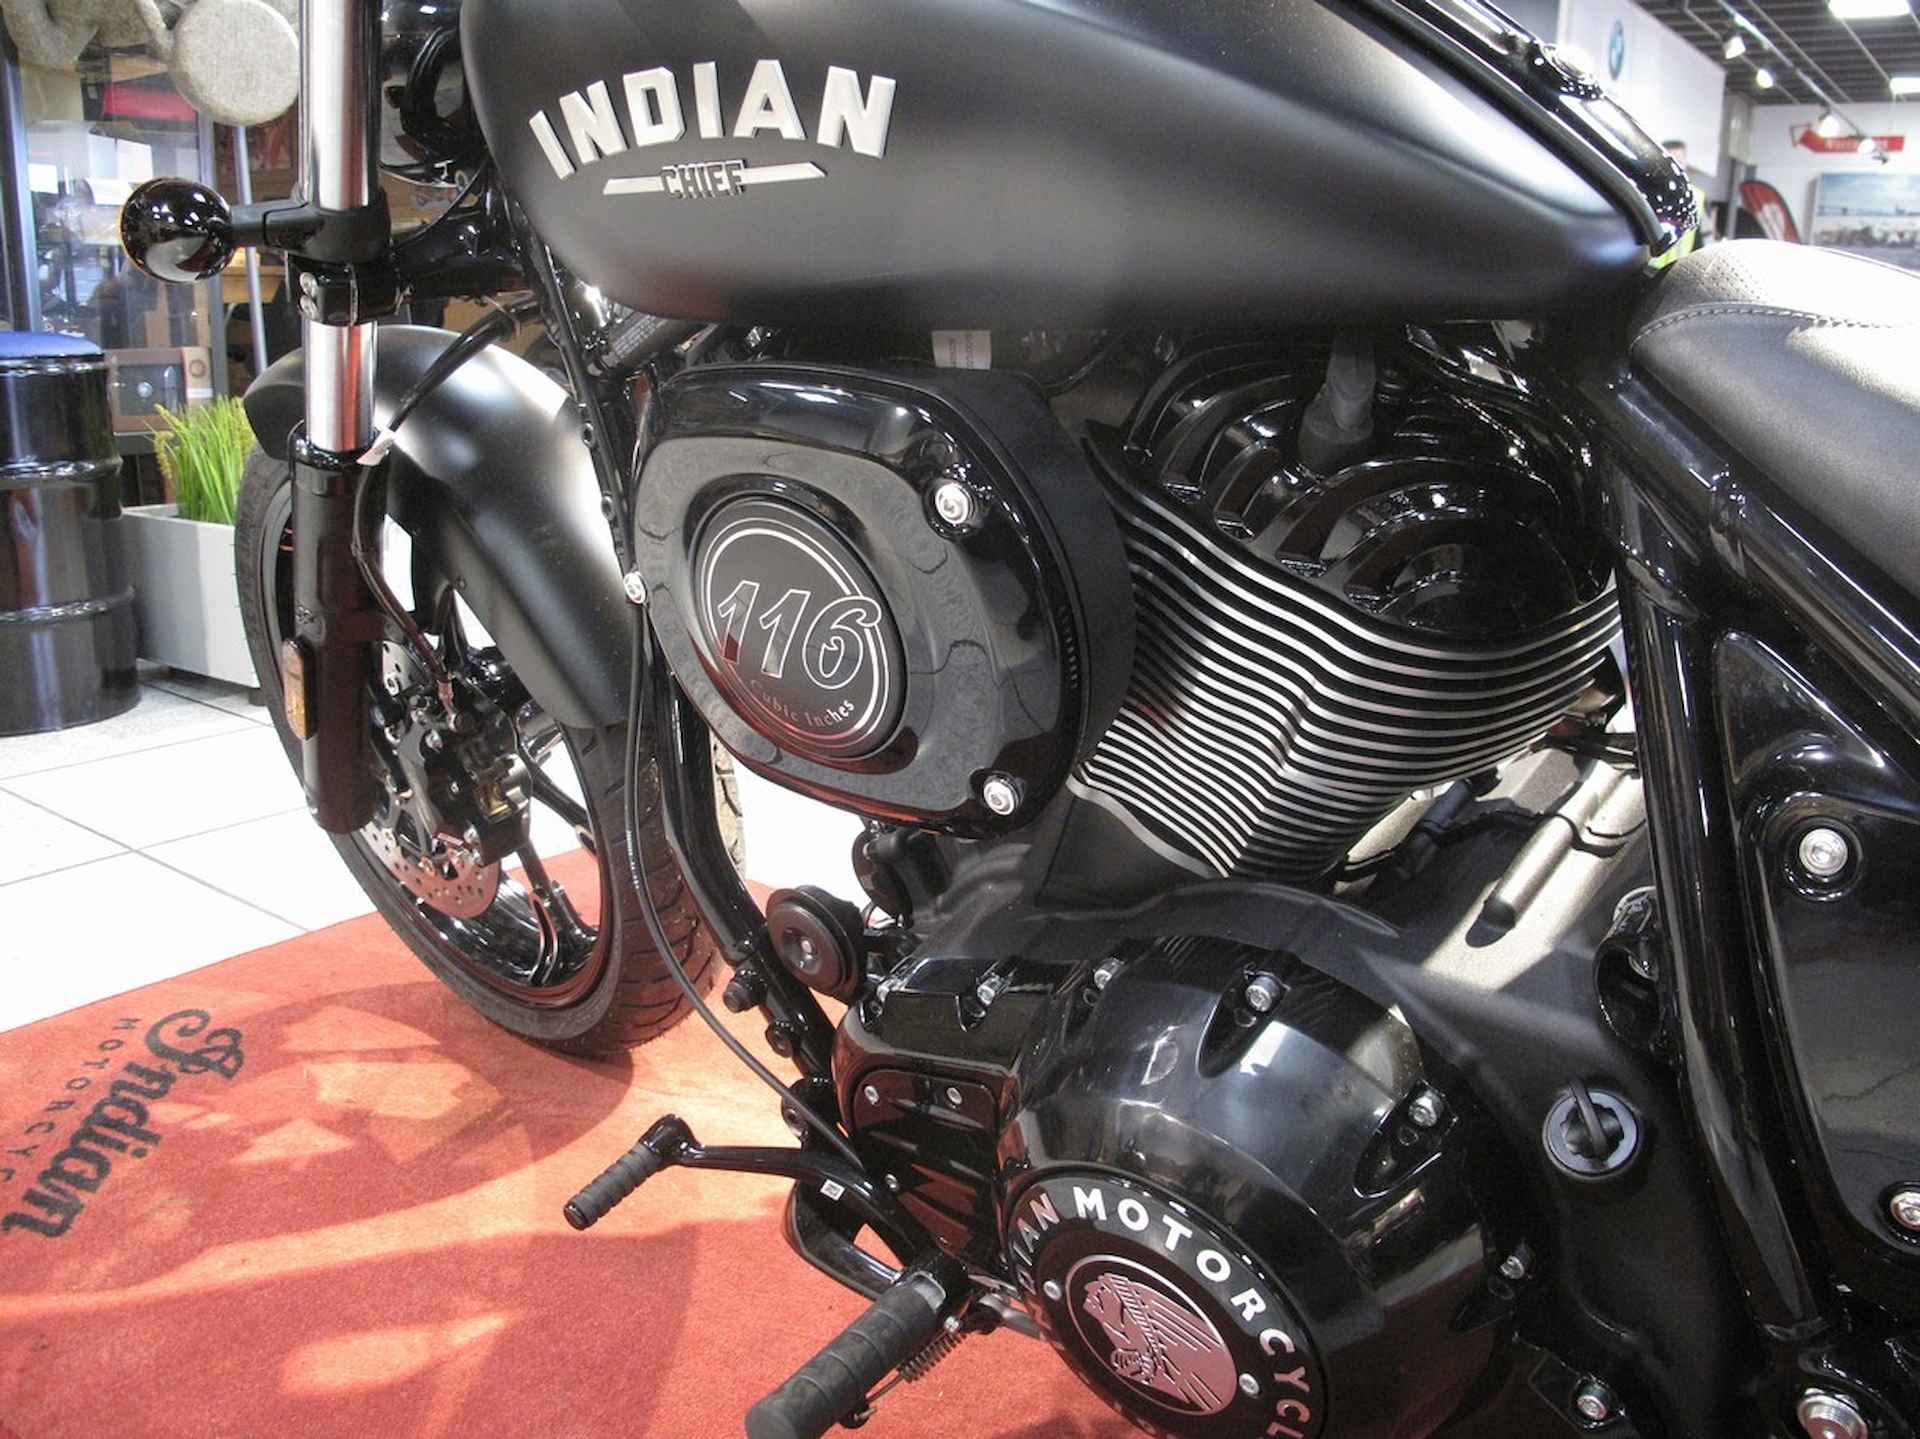 Indian Chief Dark Horse Official Indian Motoercycle Dealer - 6/11